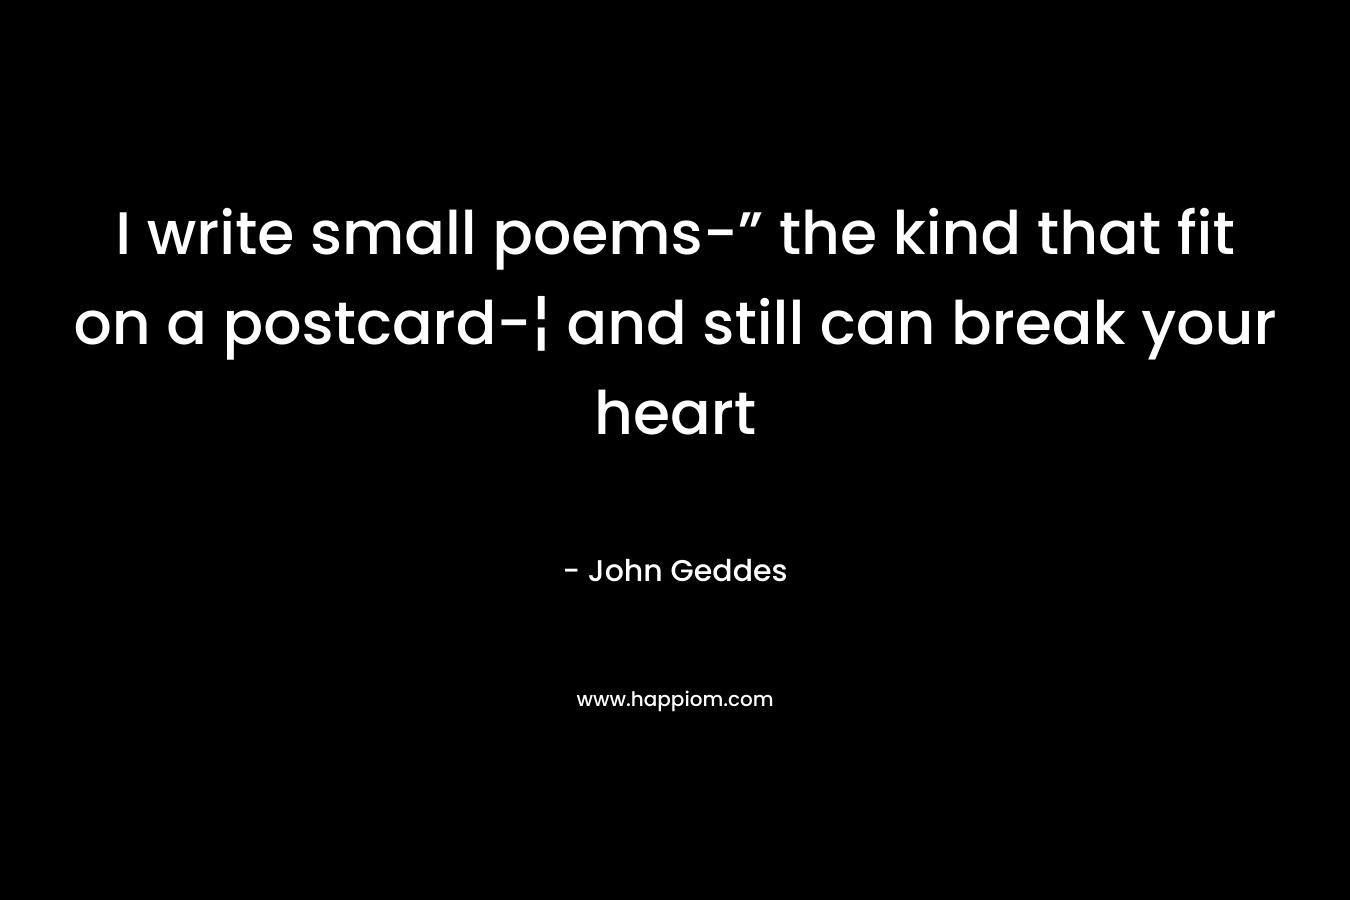 I write small poems-” the kind that fit on a postcard-¦ and still can break your heart – John Geddes